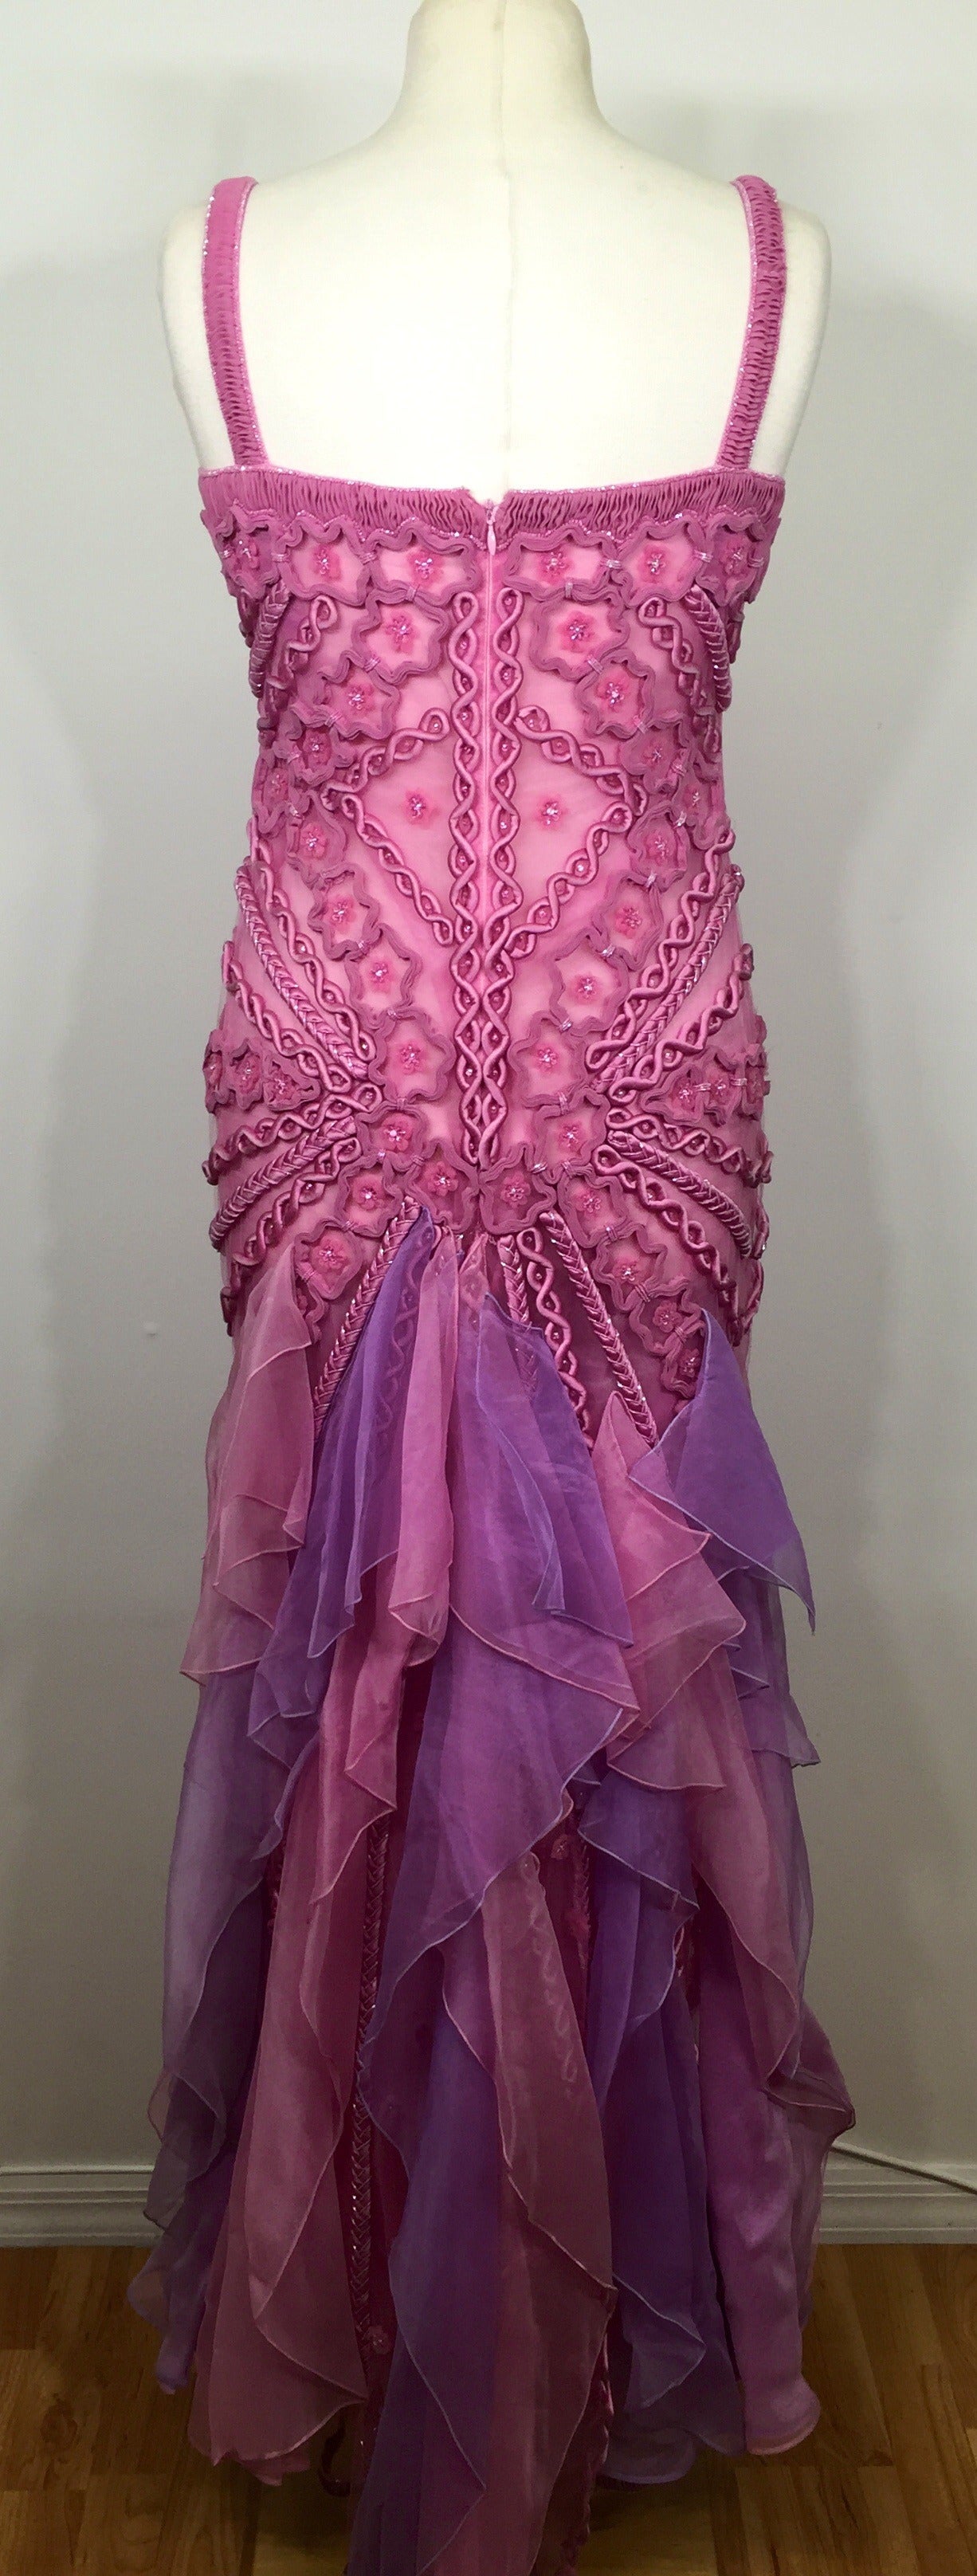 Valentino Incredible Beaded Silk Chiffon Pink & Purple Gown 8 For Sale 4